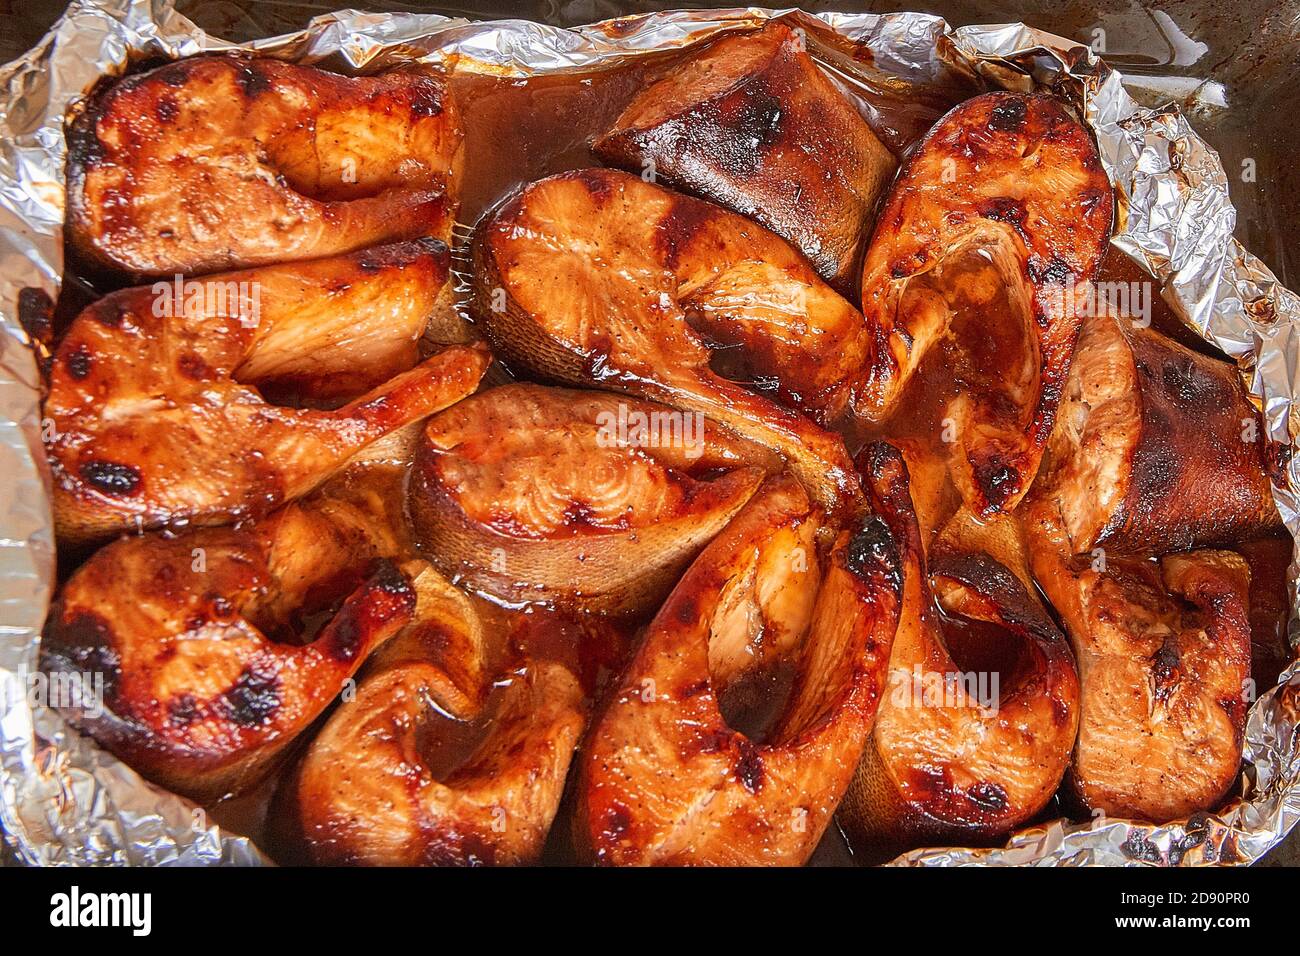 baked red fish in a marinade of teriyaki sauce Stock Photo